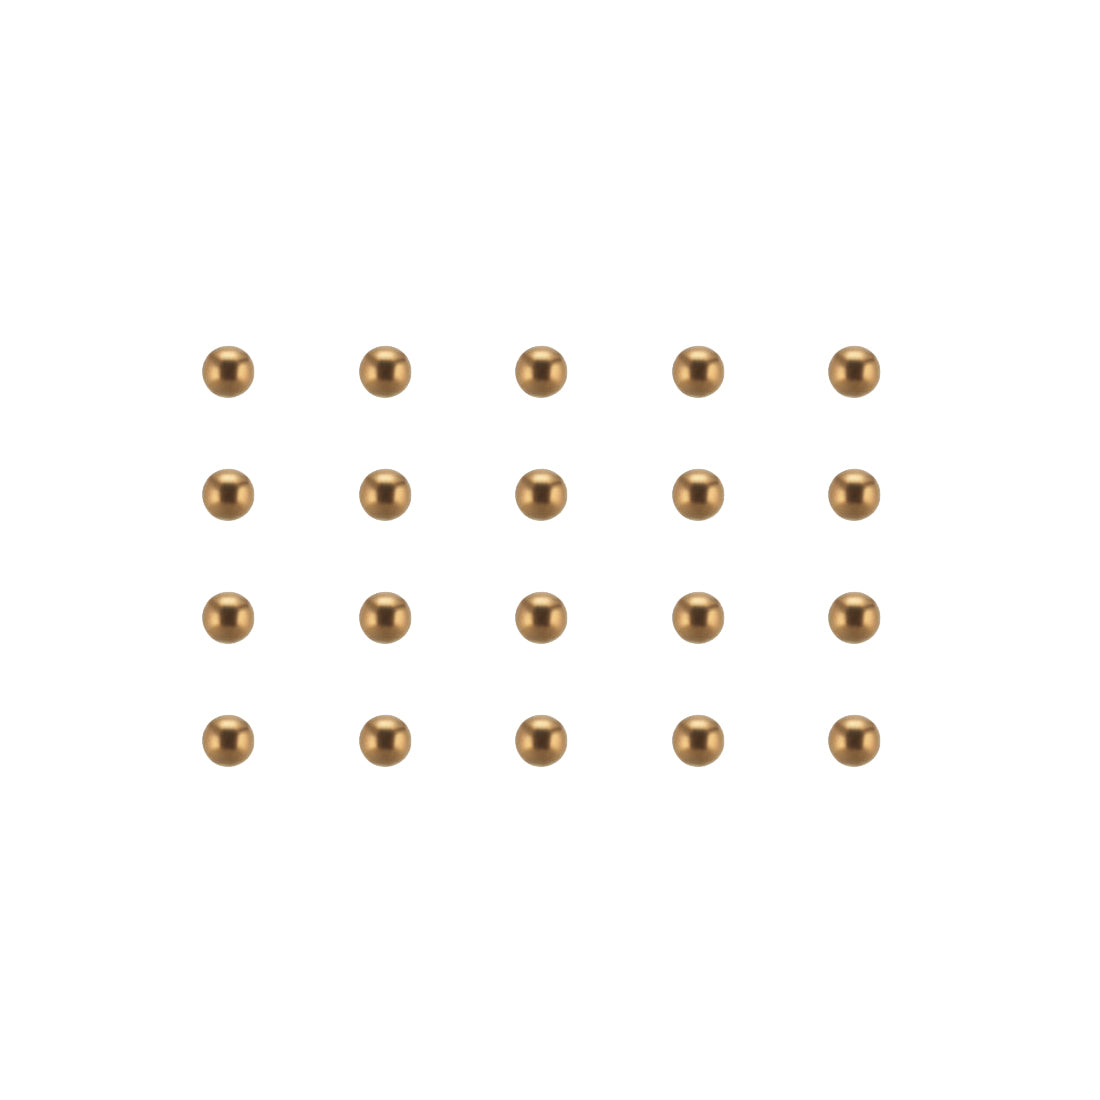 Uxcell Uxcell 10mm Precision Solid Brass Bearing Balls 20pcs